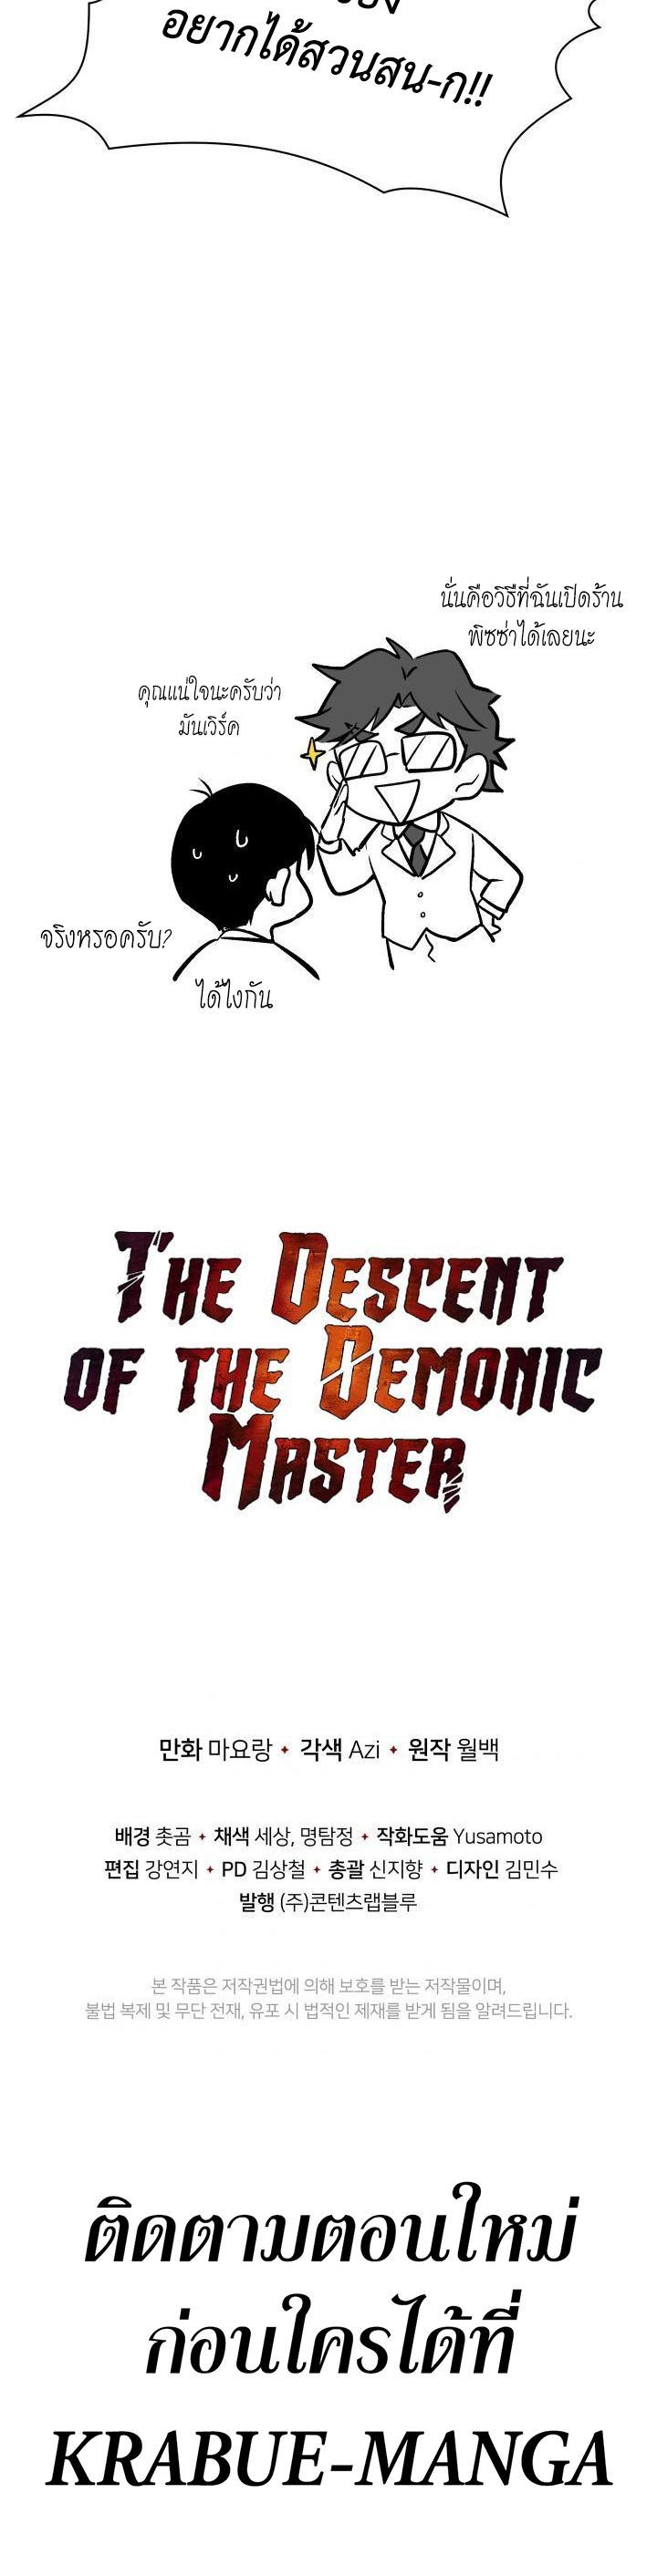 The Descent of the Demonic Master99 36